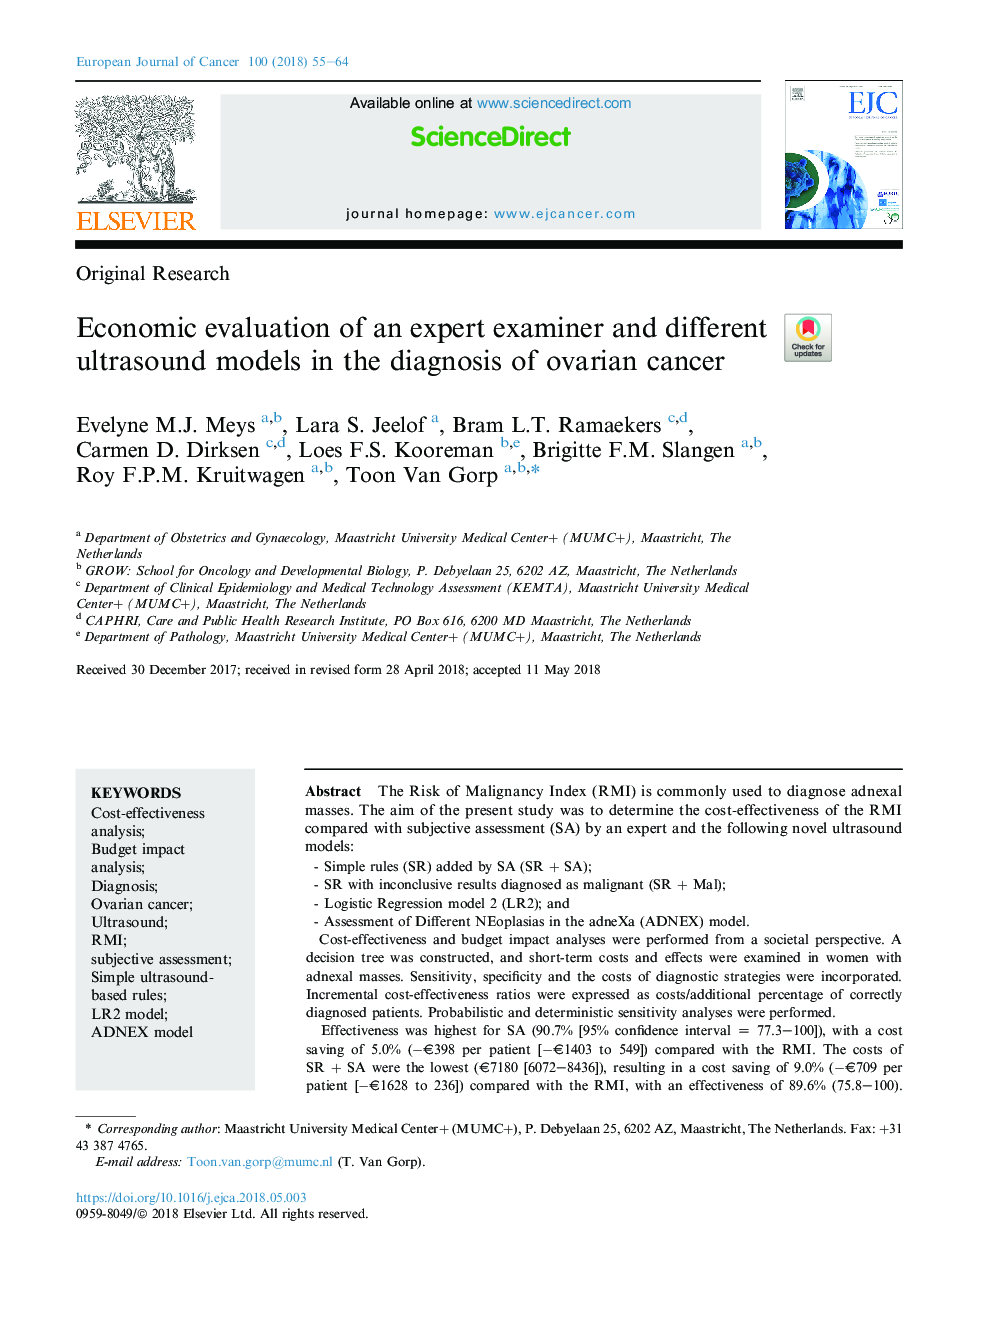 Economic evaluation of an expert examiner and different ultrasound models in the diagnosis of ovarian cancer